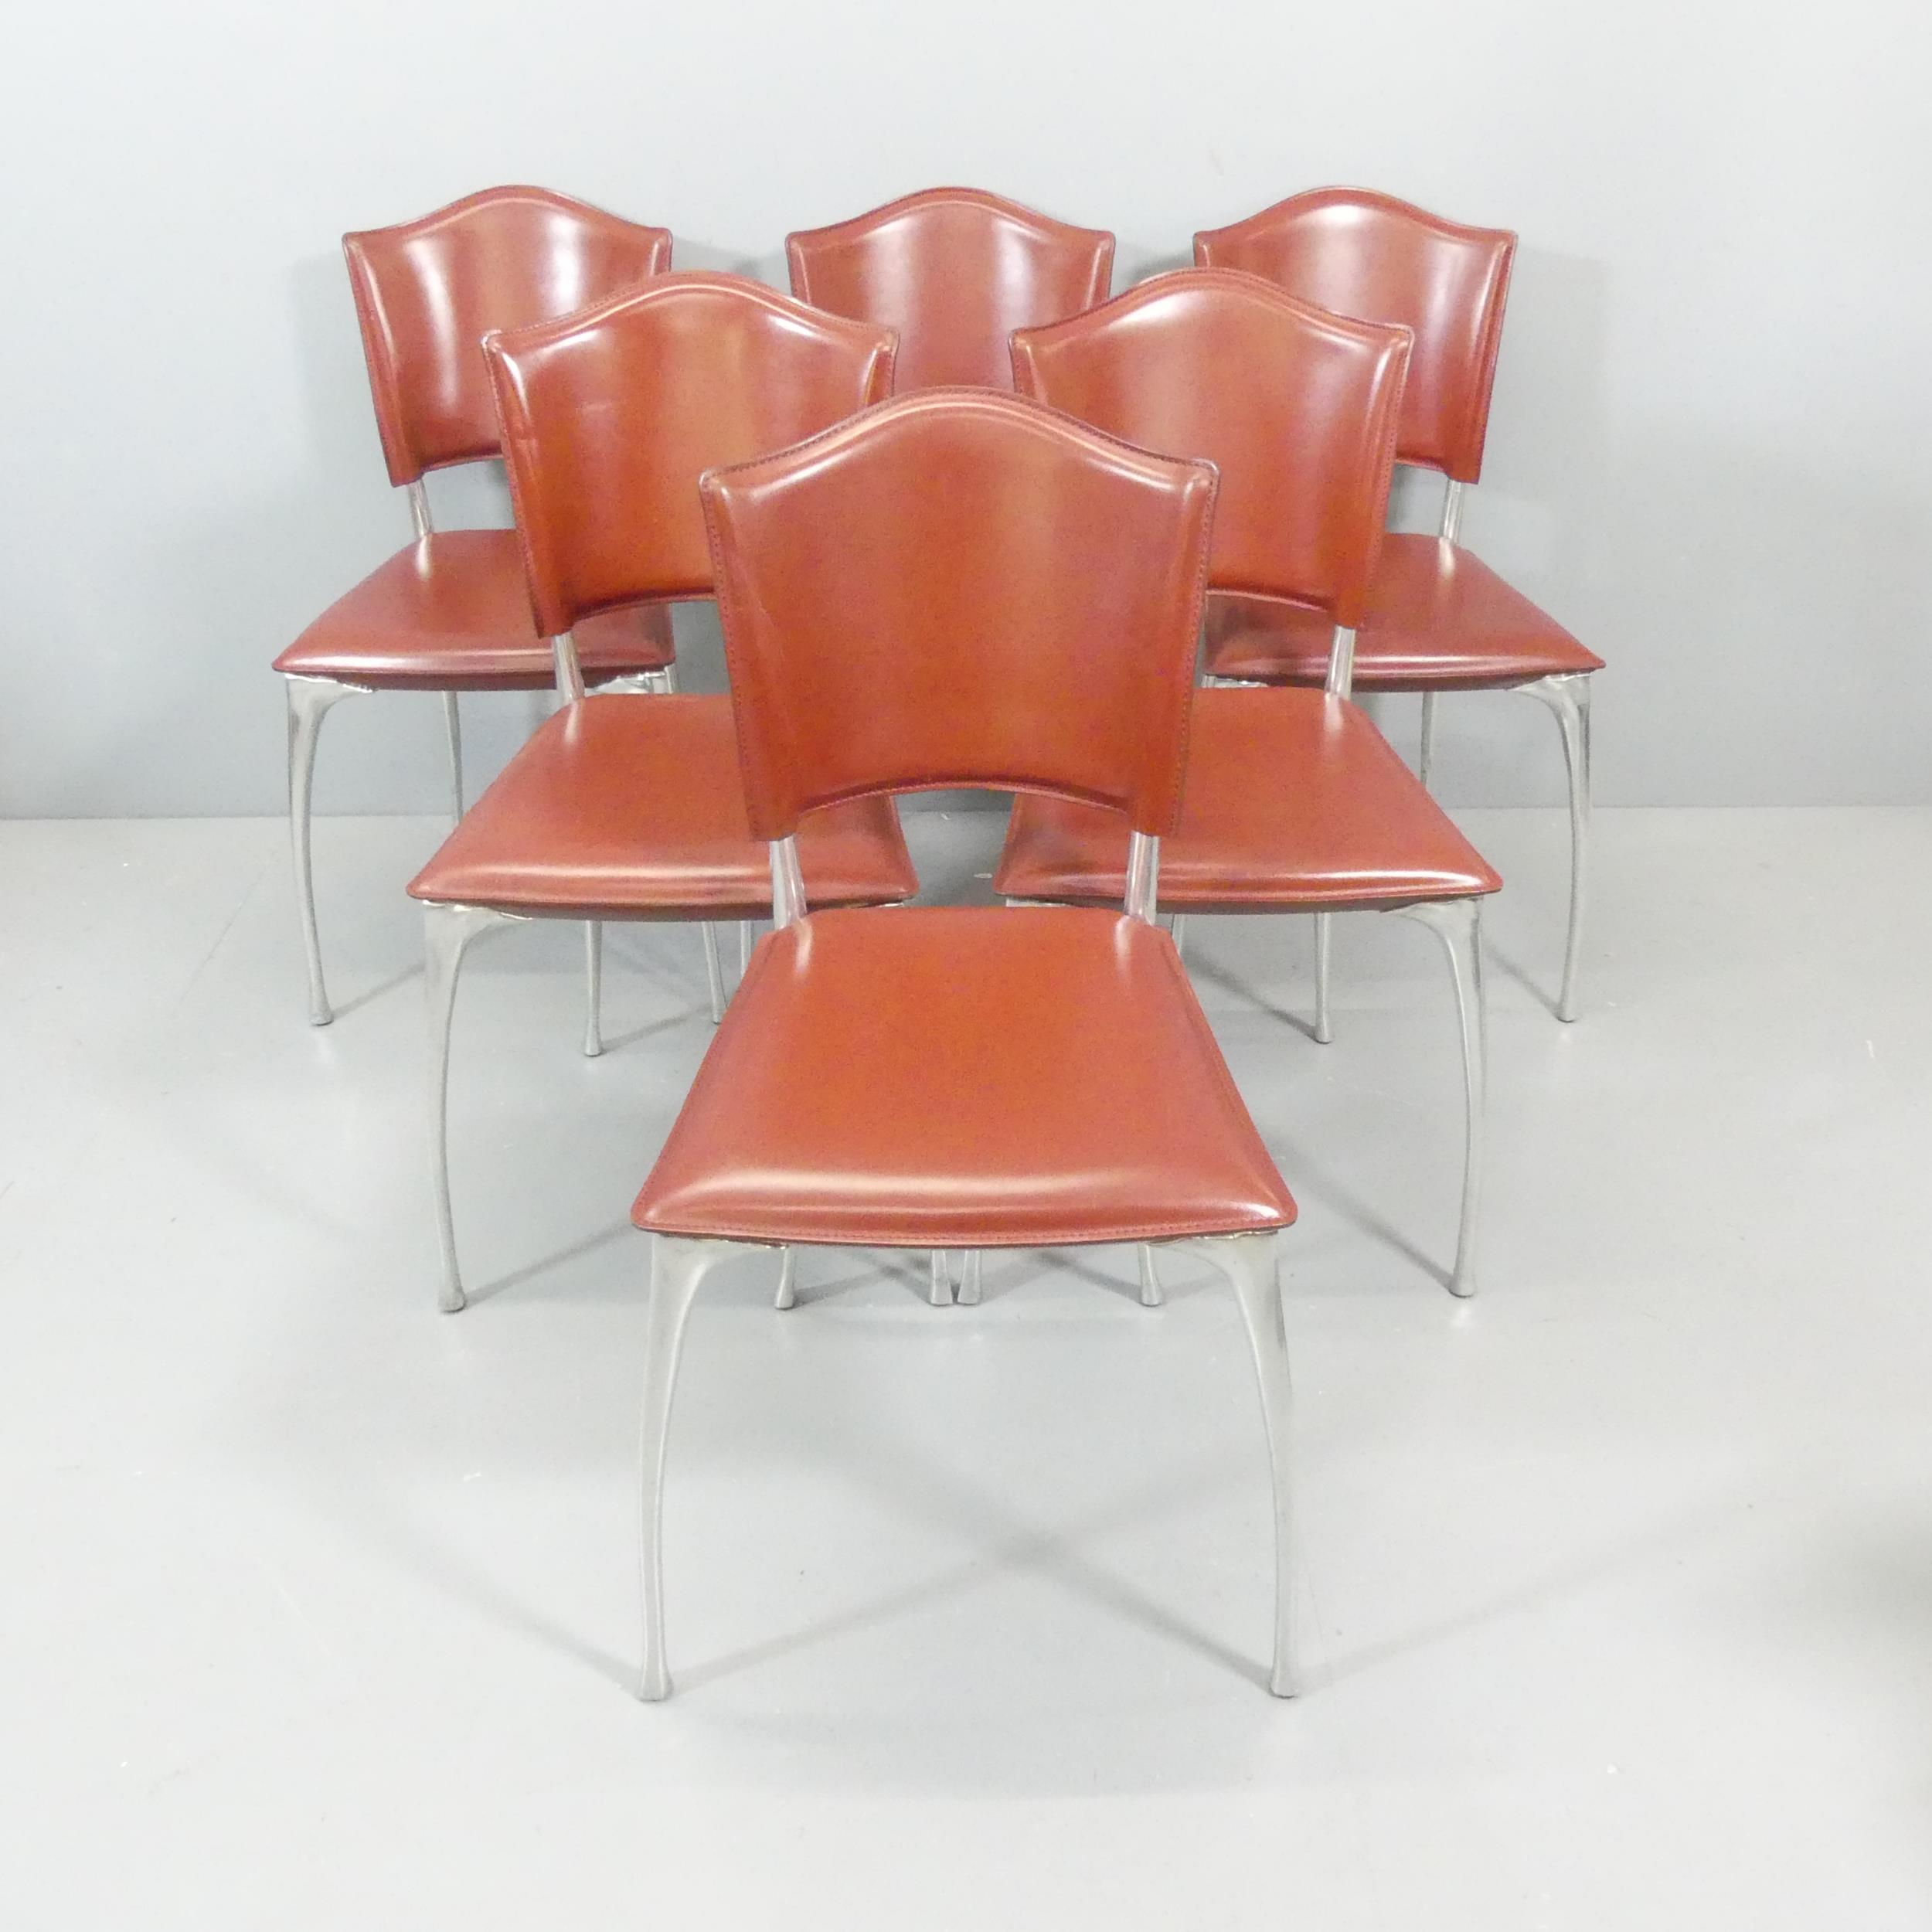 BERNARD DEQUET - A set of 6 1990s French leather and aluminium dining chairs.